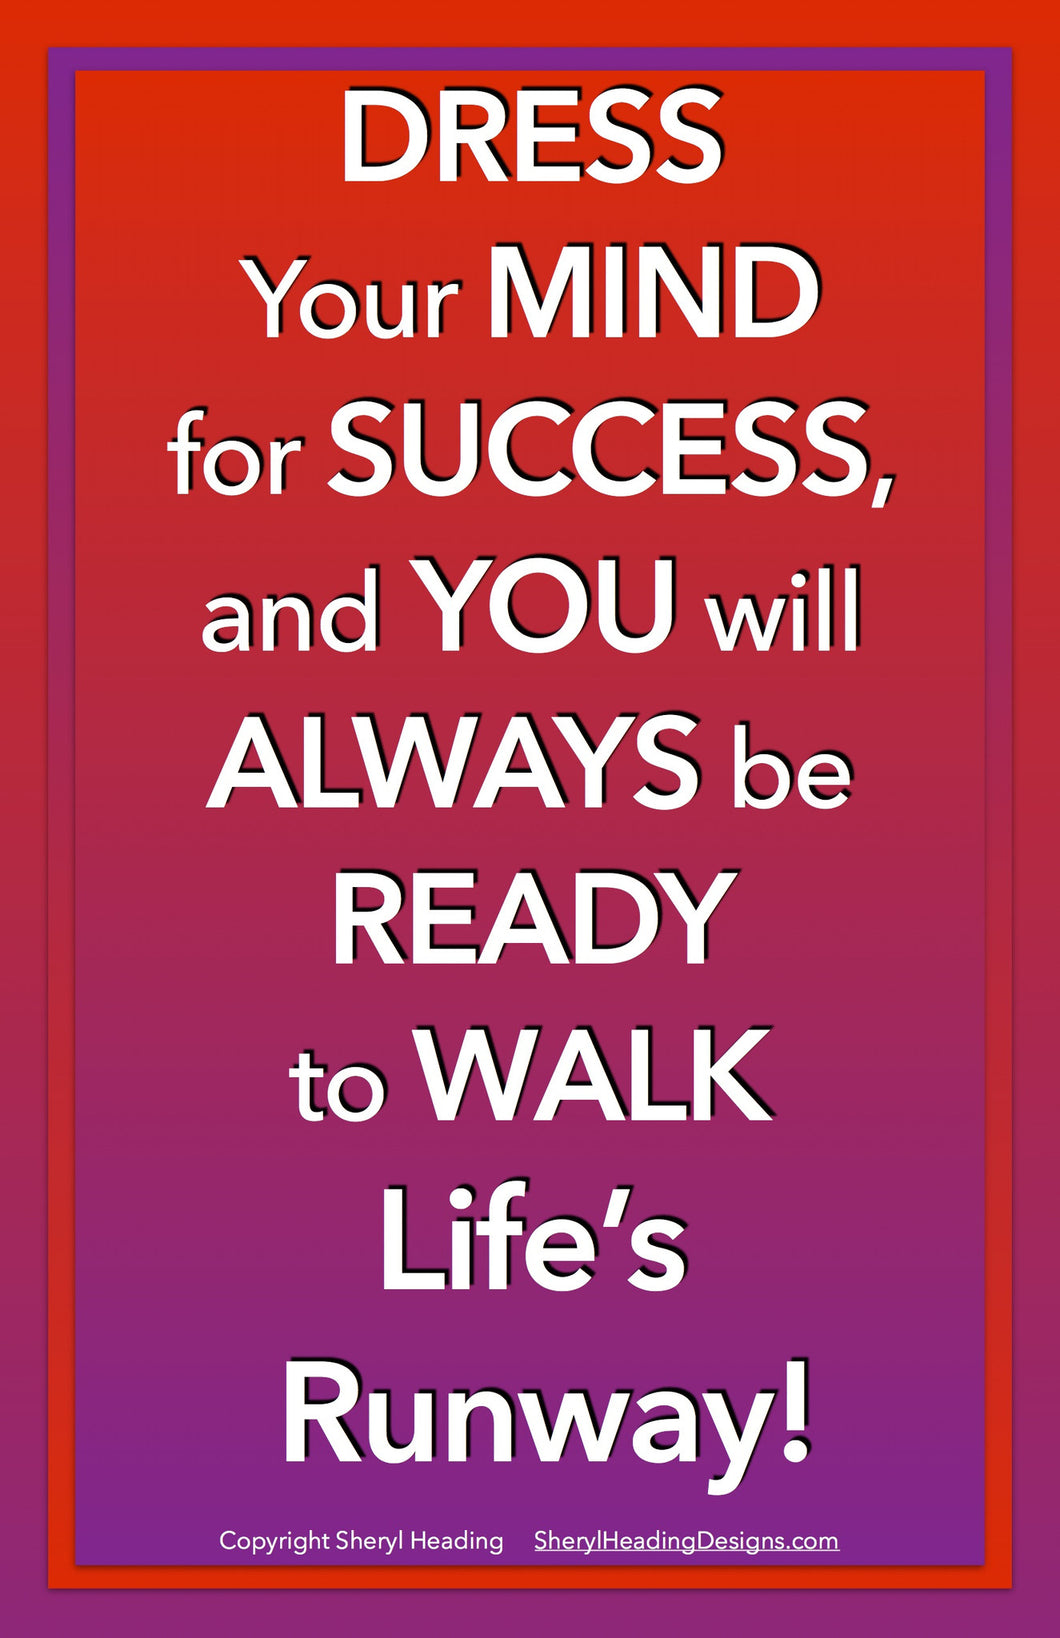 Dress Your Mind For Success Poster - Sheryl Heading Designs